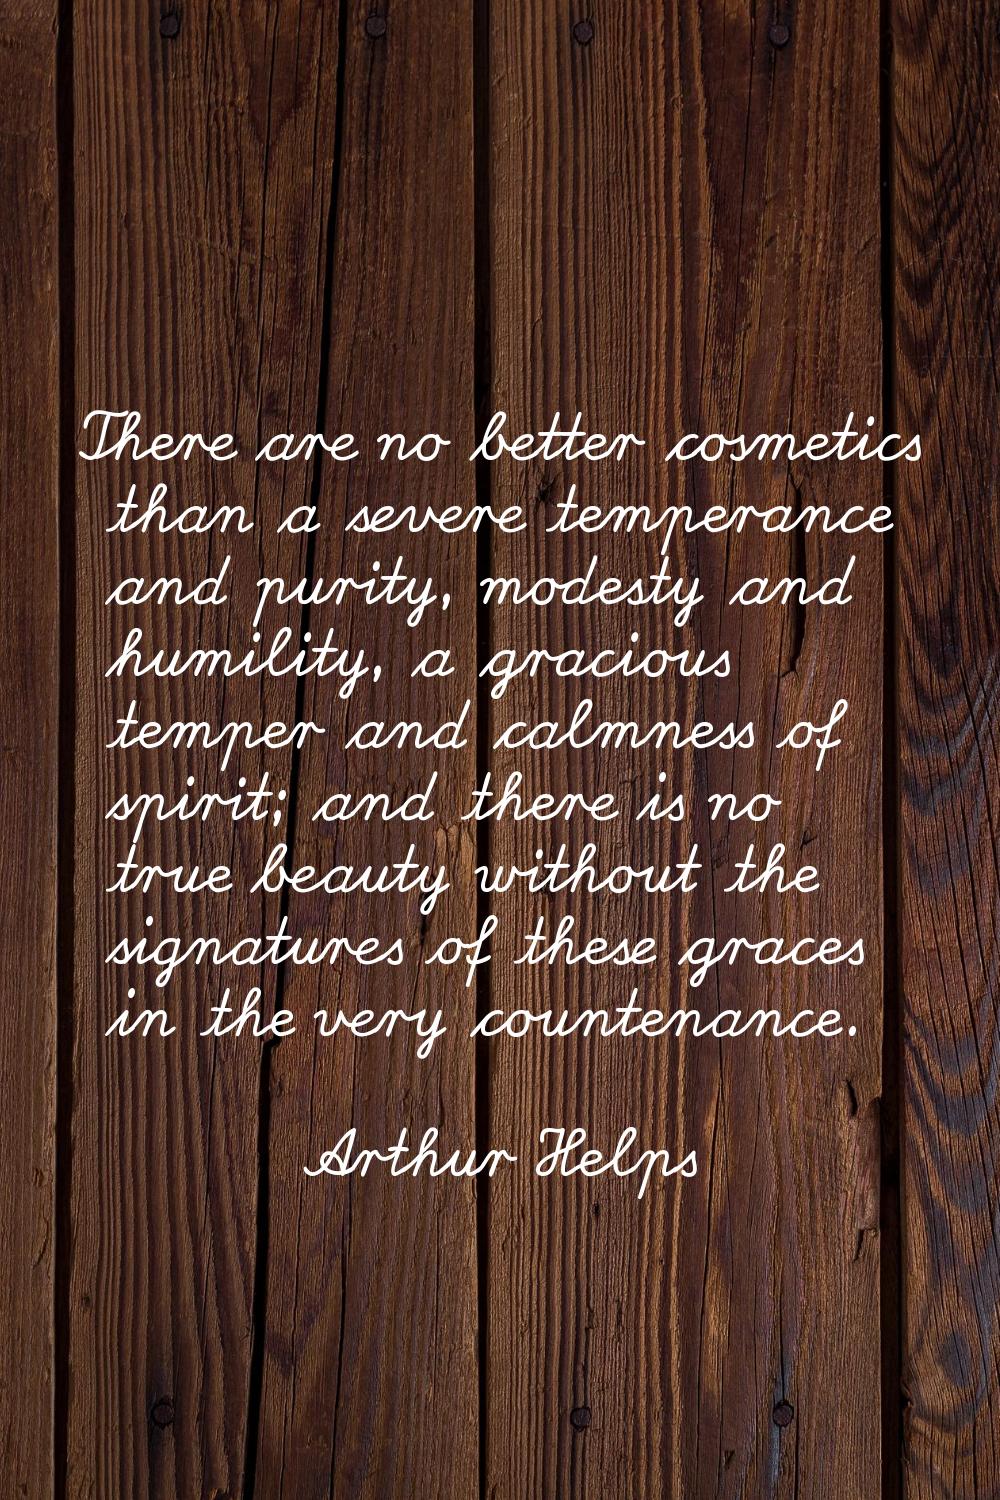 There are no better cosmetics than a severe temperance and purity, modesty and humility, a gracious